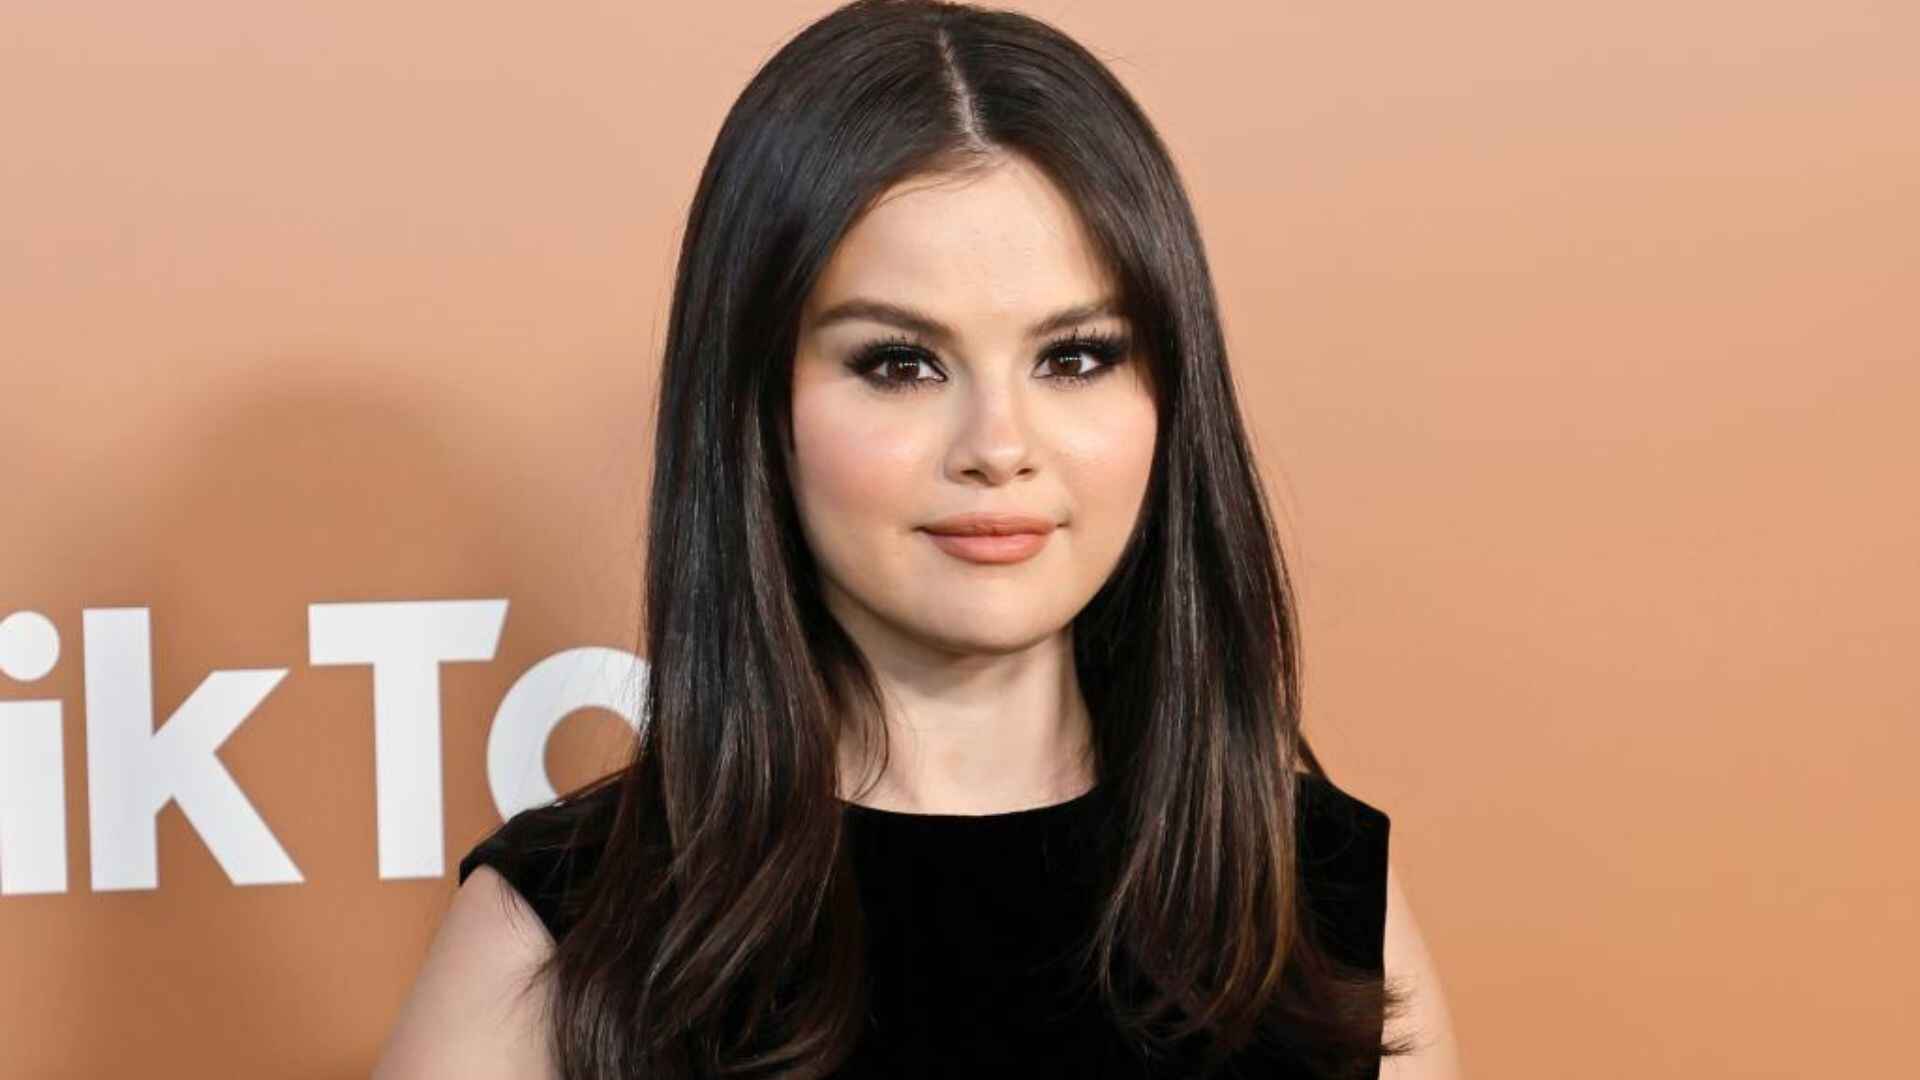 Selena Gomez Champions Mental Health Awareness At Special Event